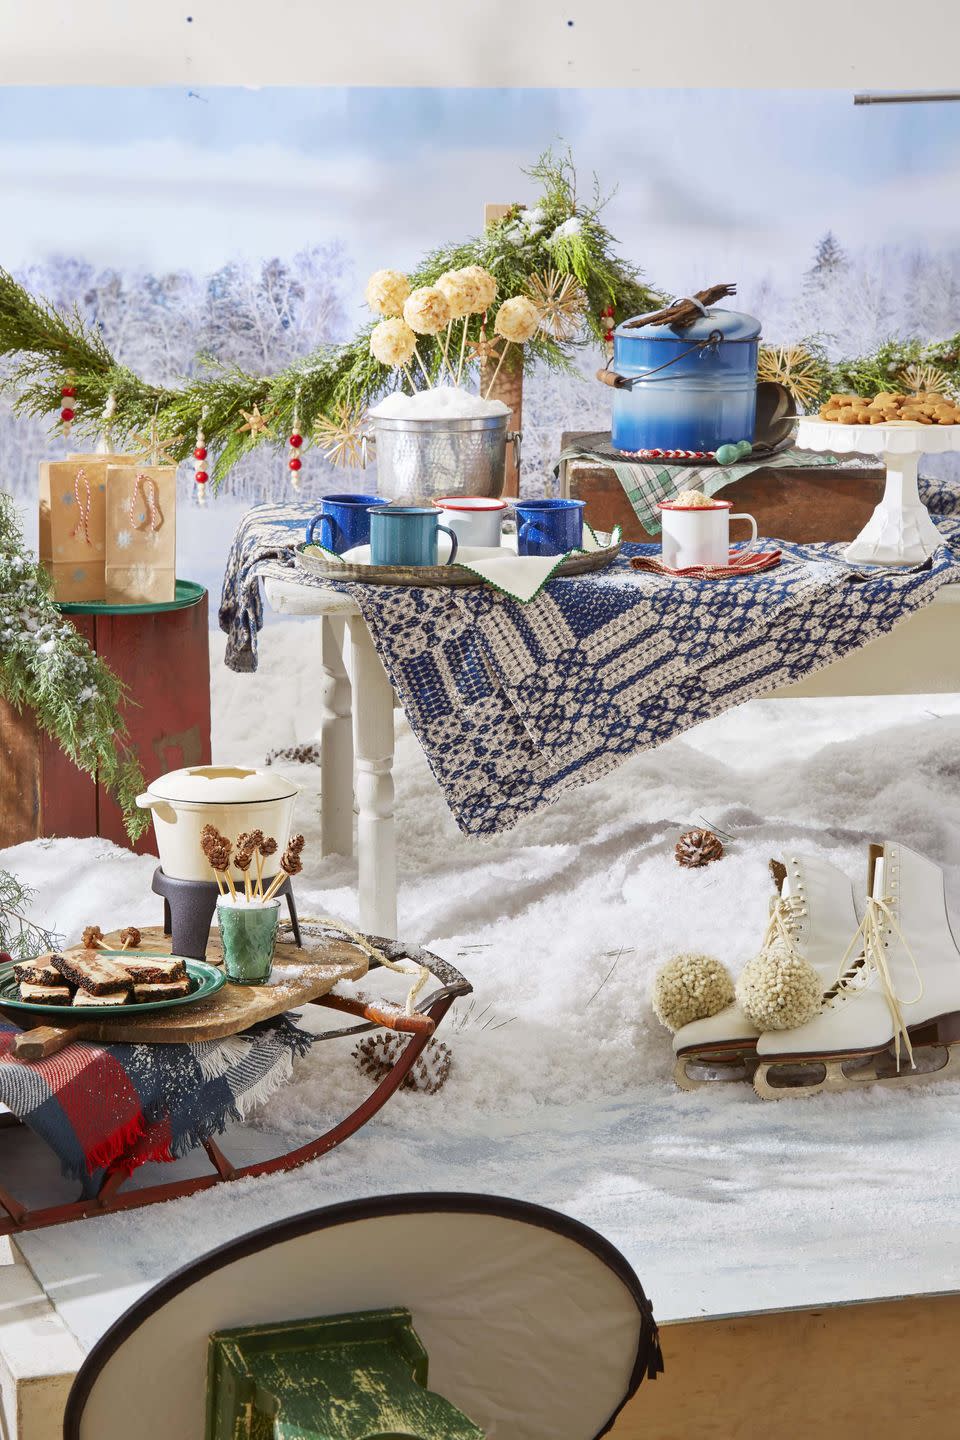 <p>Gather your friends for some winter revelry. Embrace the cold weather and serve up some <a href="https://www.countryliving.com/food-drinks/a38092639/hot-buttered-rum-with-coconut-vanilla-ice-cream-balls-recipe/" rel="nofollow noopener" target="_blank" data-ylk="slk:Hot Buttered Rum with Vanilla Ice Cream Balls" class="link ">Hot Buttered Rum with Vanilla Ice Cream Balls</a> and your favorite <a href="https://www.countryliving.com/food-drinks/g647/holiday-cookies-1208/" rel="nofollow noopener" target="_blank" data-ylk="slk:Christmas cookies" class="link ">Christmas cookies</a> for an ice-skating party. No snow? No problem. Throw on a scarf and make it a porch party.</p>